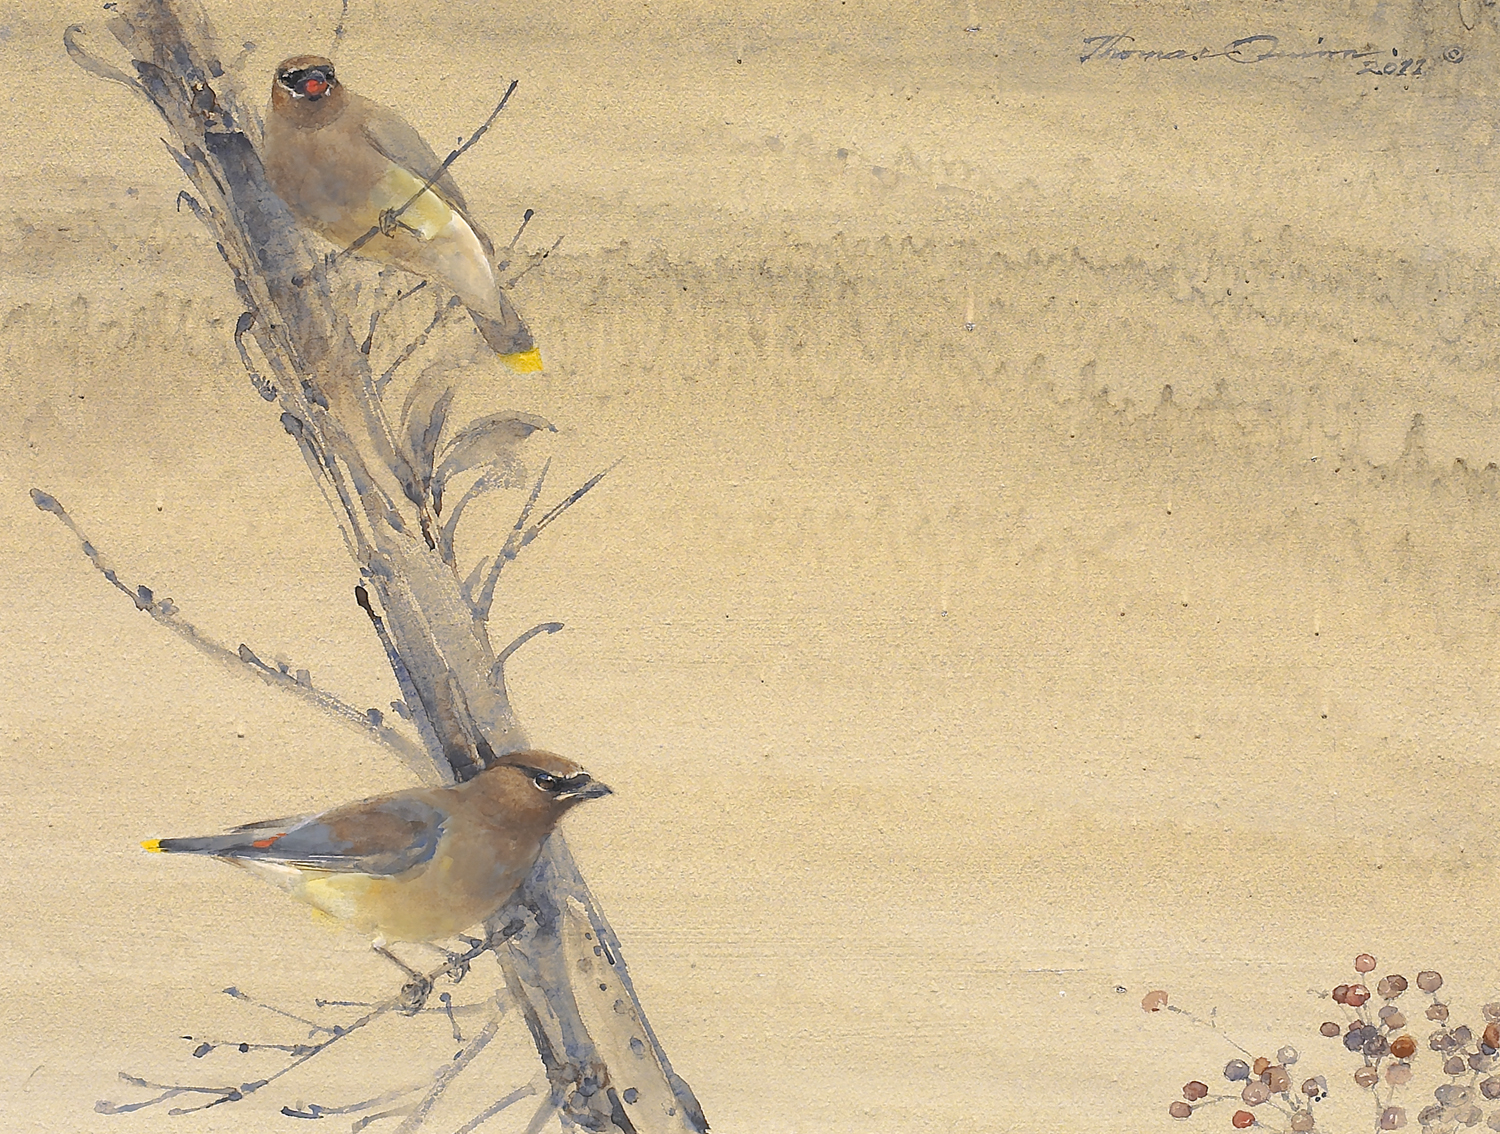 

											Tony Angell, Thomas Quinn</b>

											<em>
												Tony Angell and Thomas Quinn:  A Conversation with Nature</em> 

											<h4>
												September 25 - November 28, 2020											</h4>

		                																																													<i>Cedar Waxwings and Madrone Berries,</i>  
																																																					gouache on paper, 
																																								 14 5/8 x 18 7/8 inches 
																								
		                				